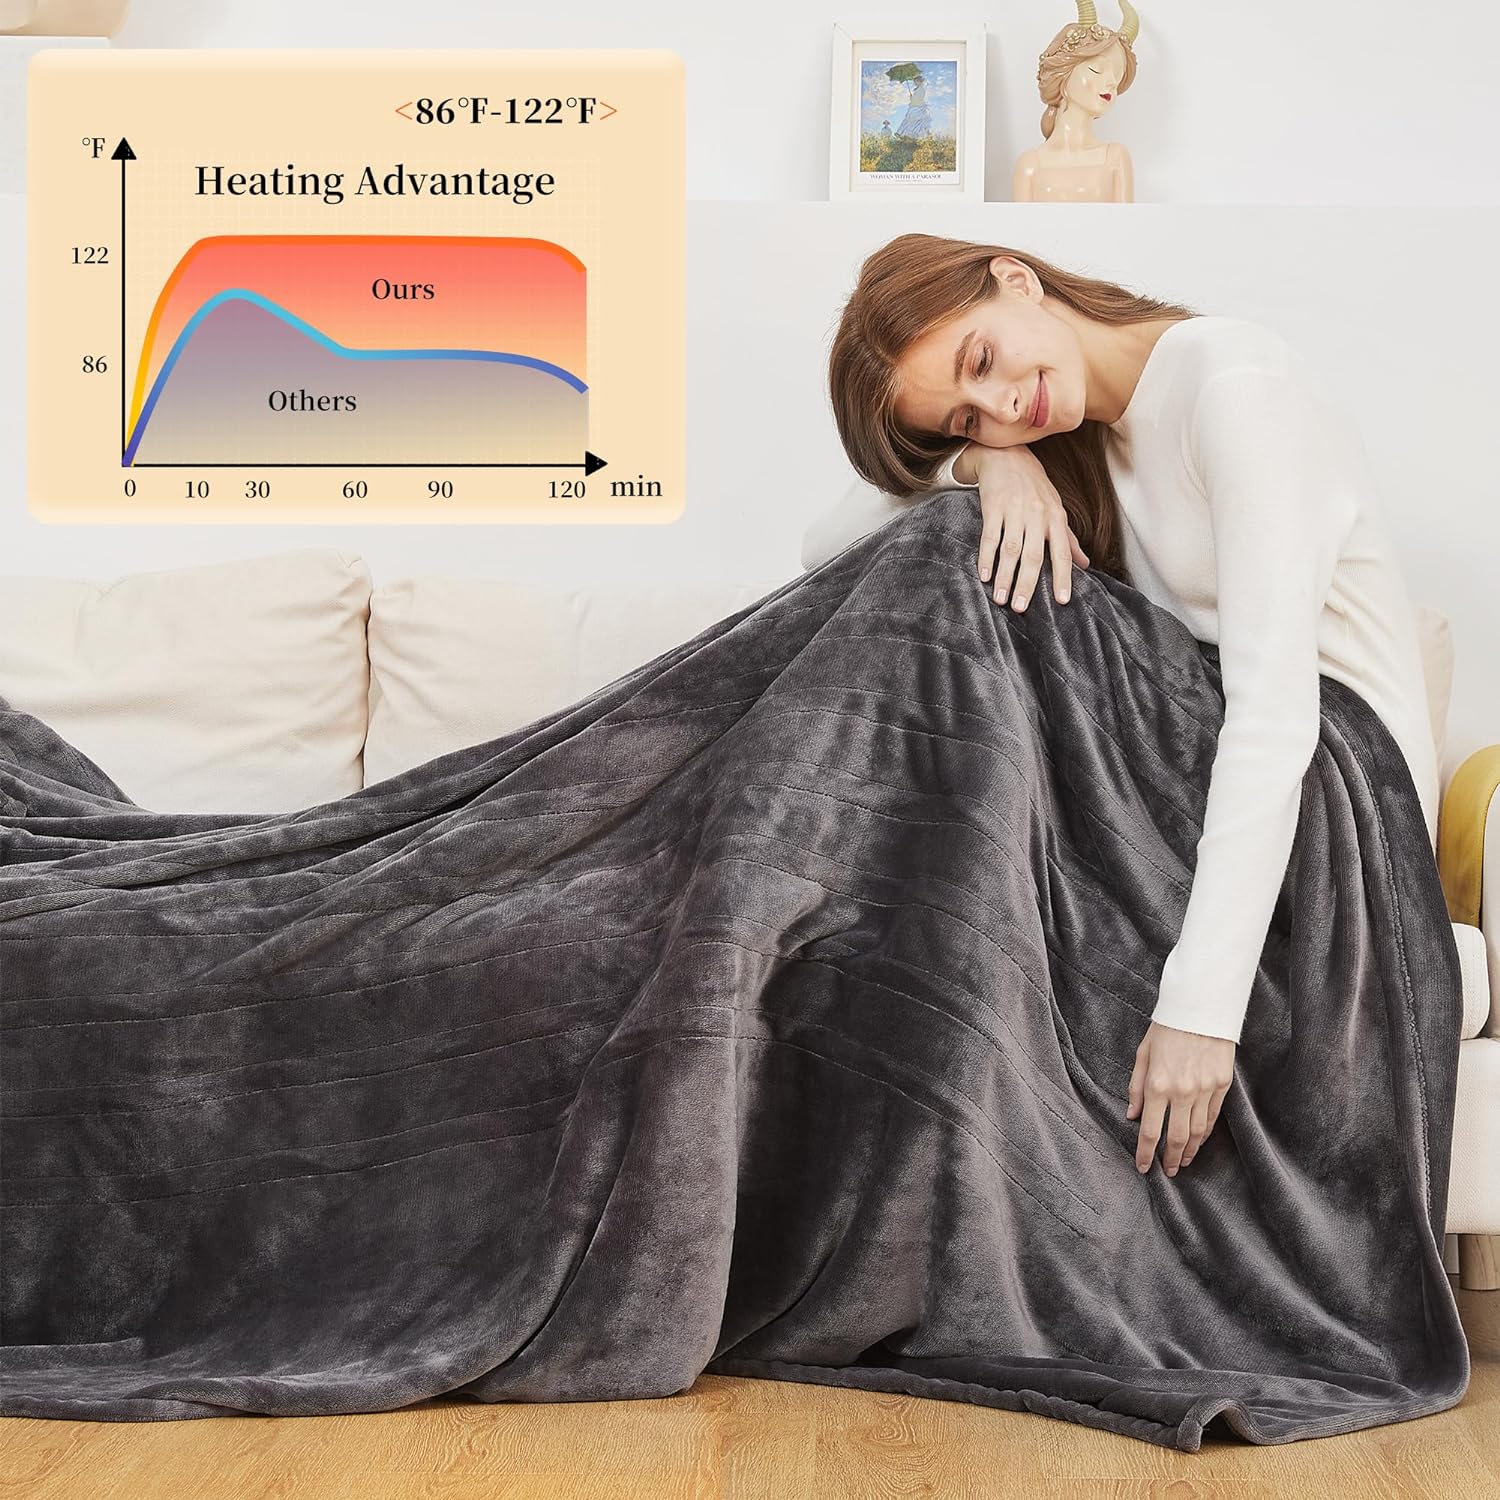 Heated Blanket Electric Blanket Full Size, 72" x 84" Heating Blanket with 6 Heating Levels & 1-10 Hours Auto Off, Super Silky Flannel Electric Heated Blanket with ETL & FCC Certification, Dark Gray